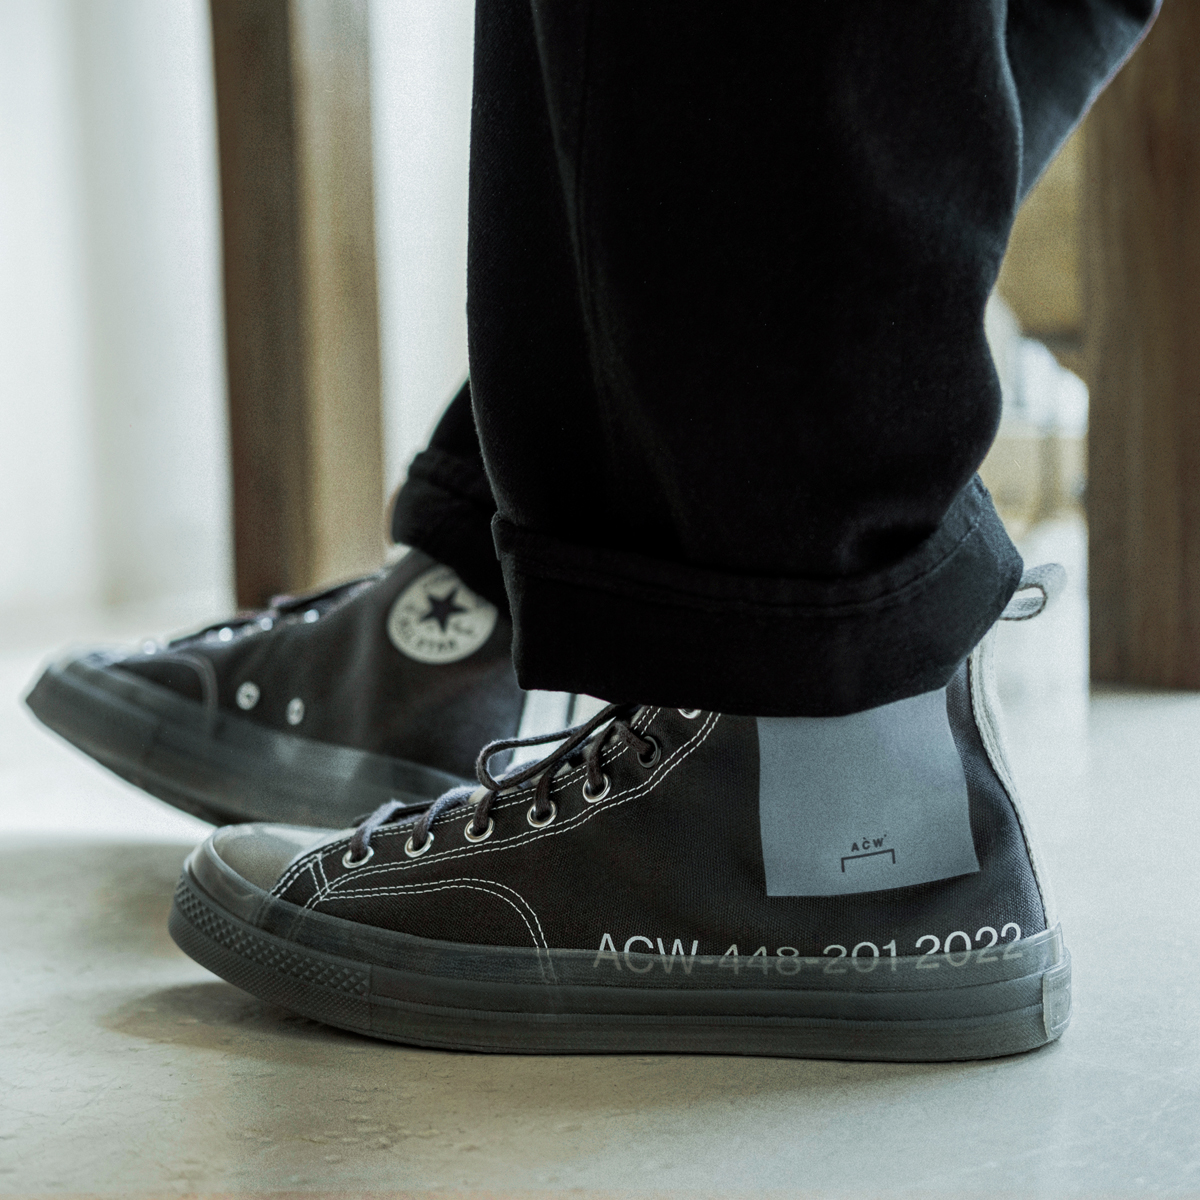 A-COLD-WALL* x Converse Chuck 70 Sneakers: Release Date, Price